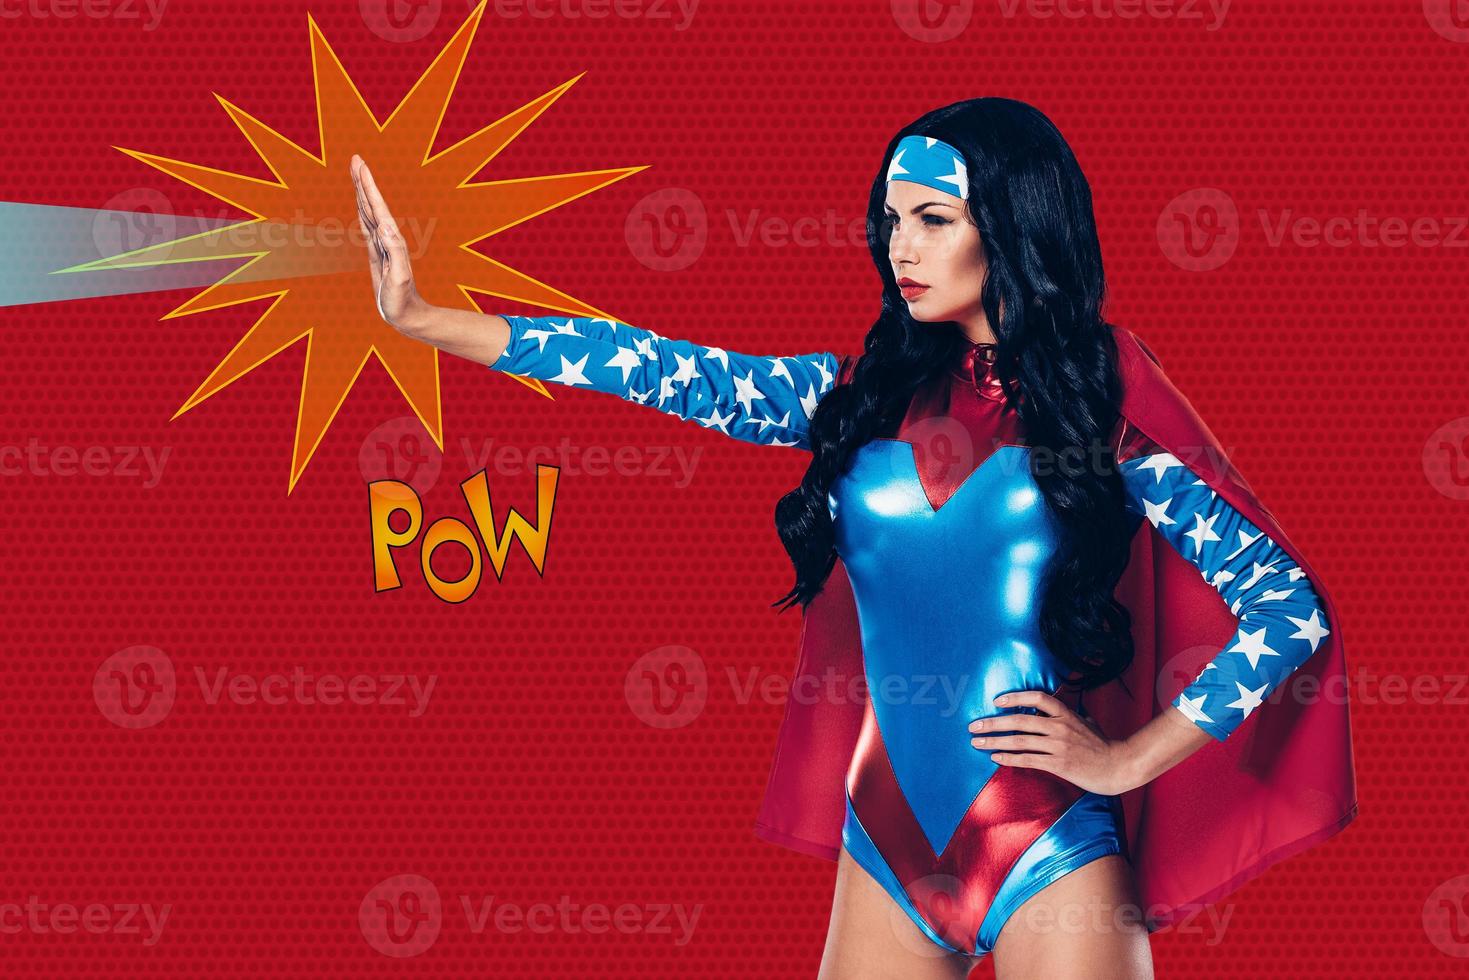 She can stop any crime. Side view of beautiful young woman in superhero costume shooting a beam from her hand while standing against red background photo